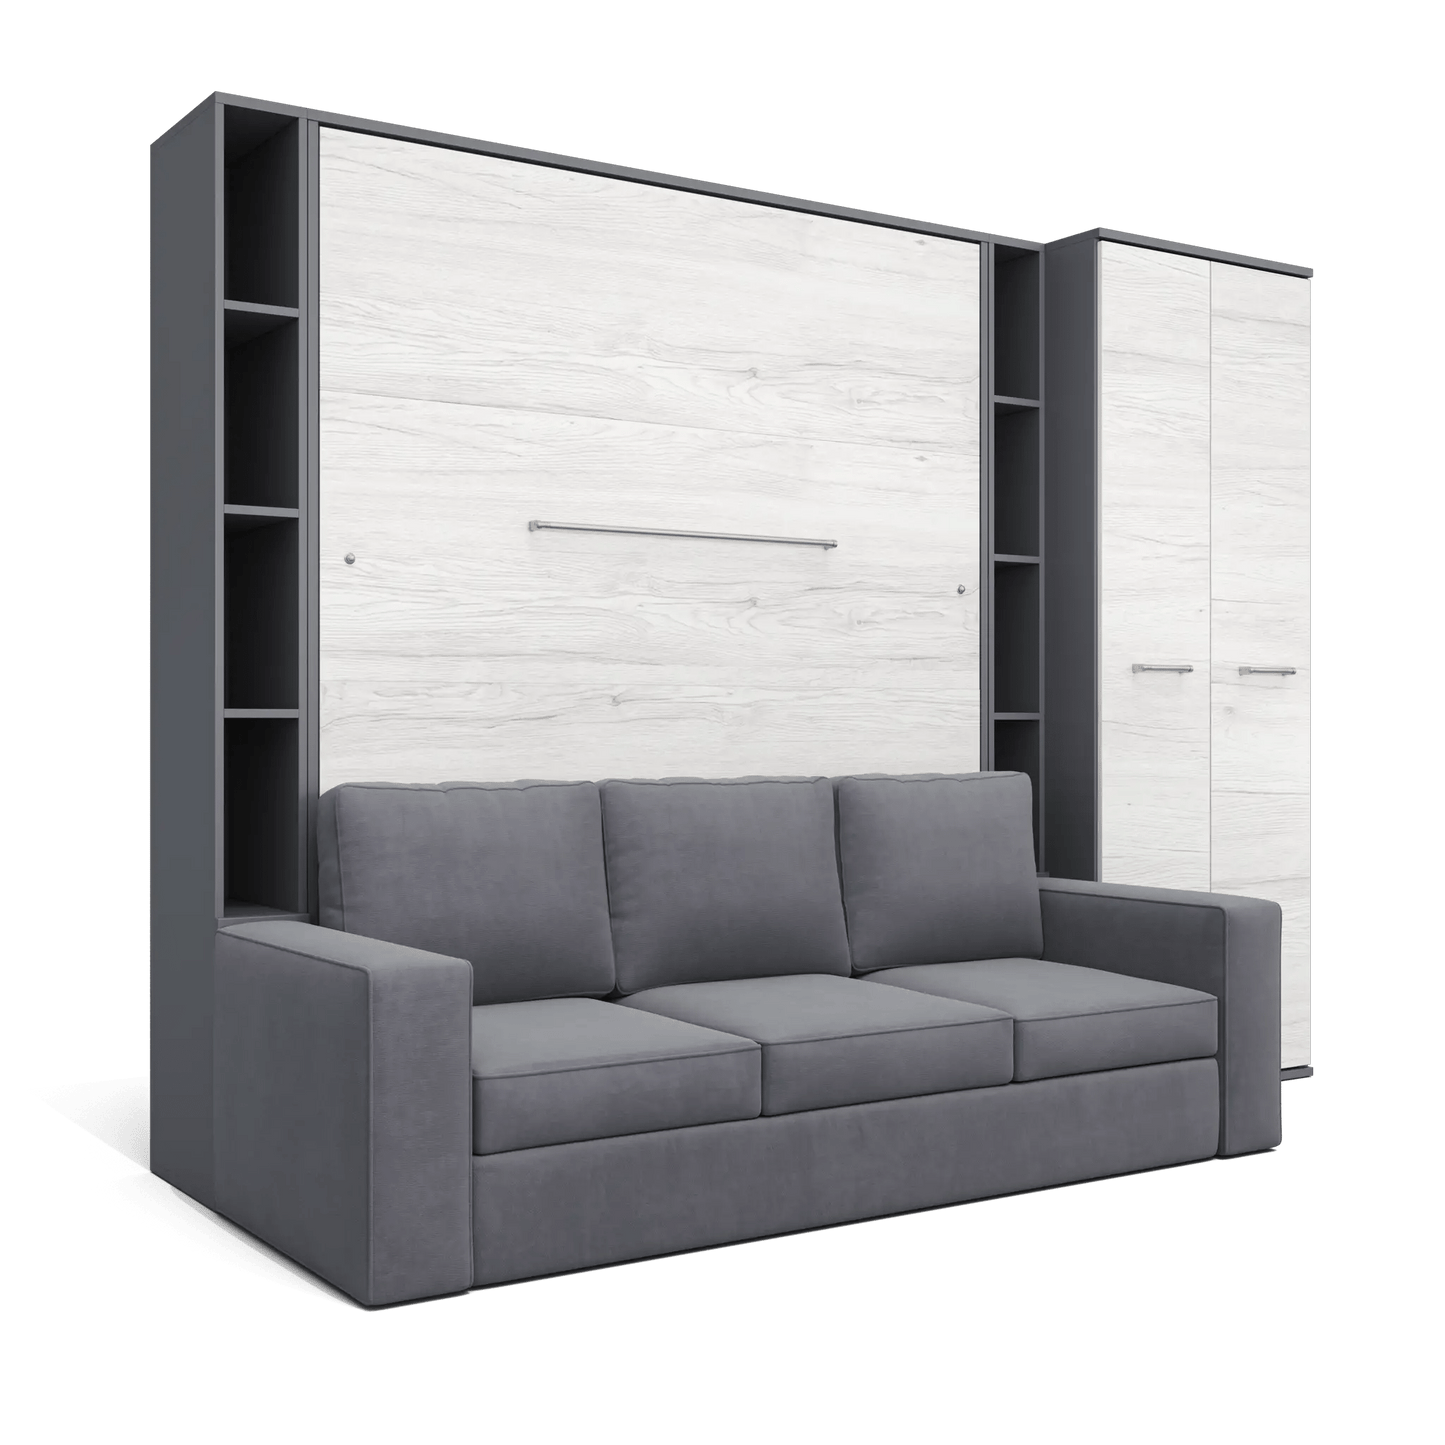 Maxima House Vertical Queen size Murphy Bed Invento with a Sofa, two Cabinets and Wardrobe Grey/White Monaco + Grey IN014/23/24GW-G